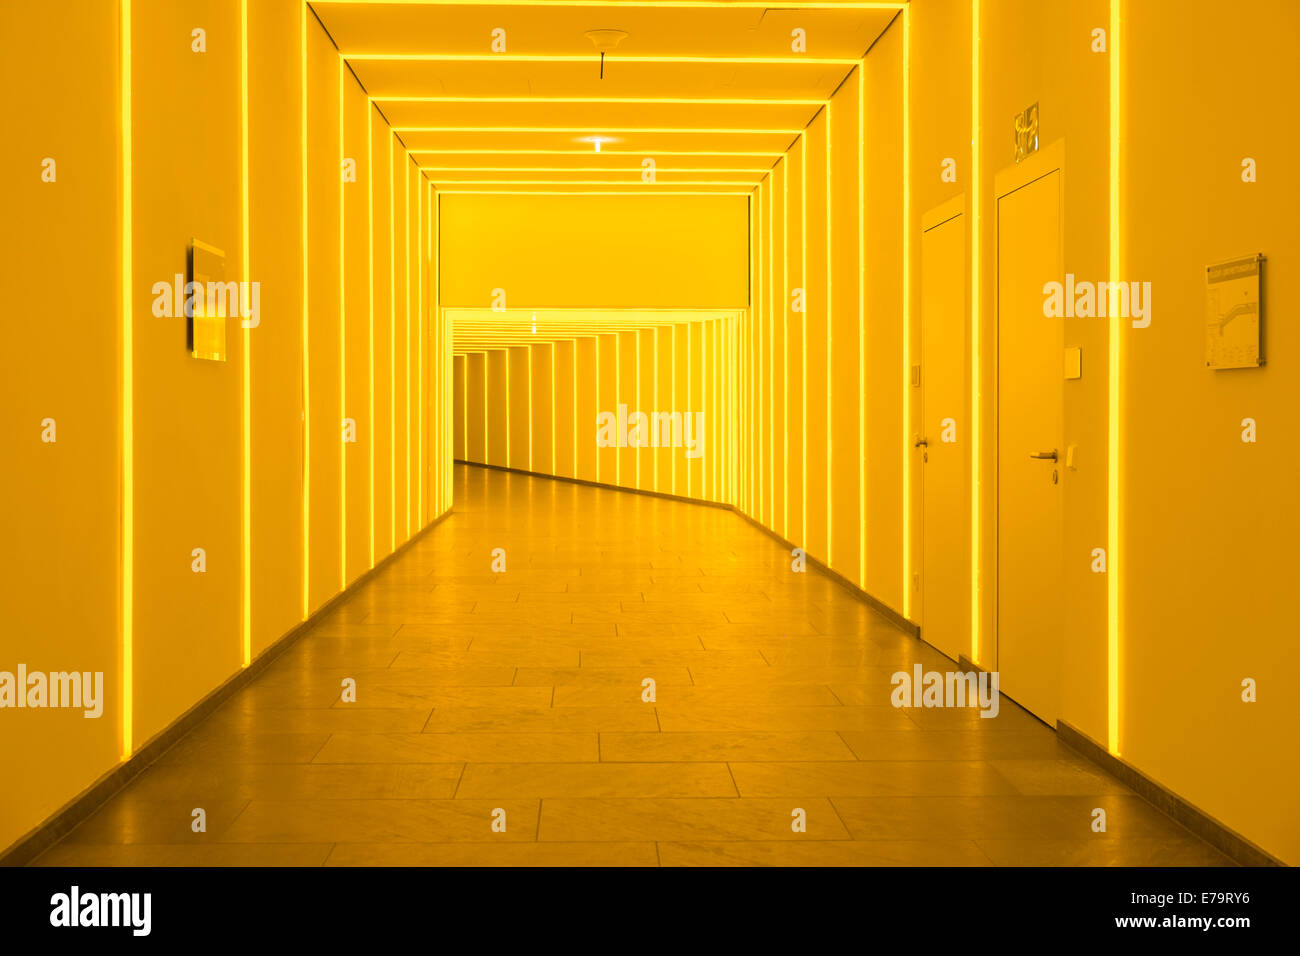 Interior of passageway lit by yellow strip lights under government buildings in Berlin Germany Stock Photo